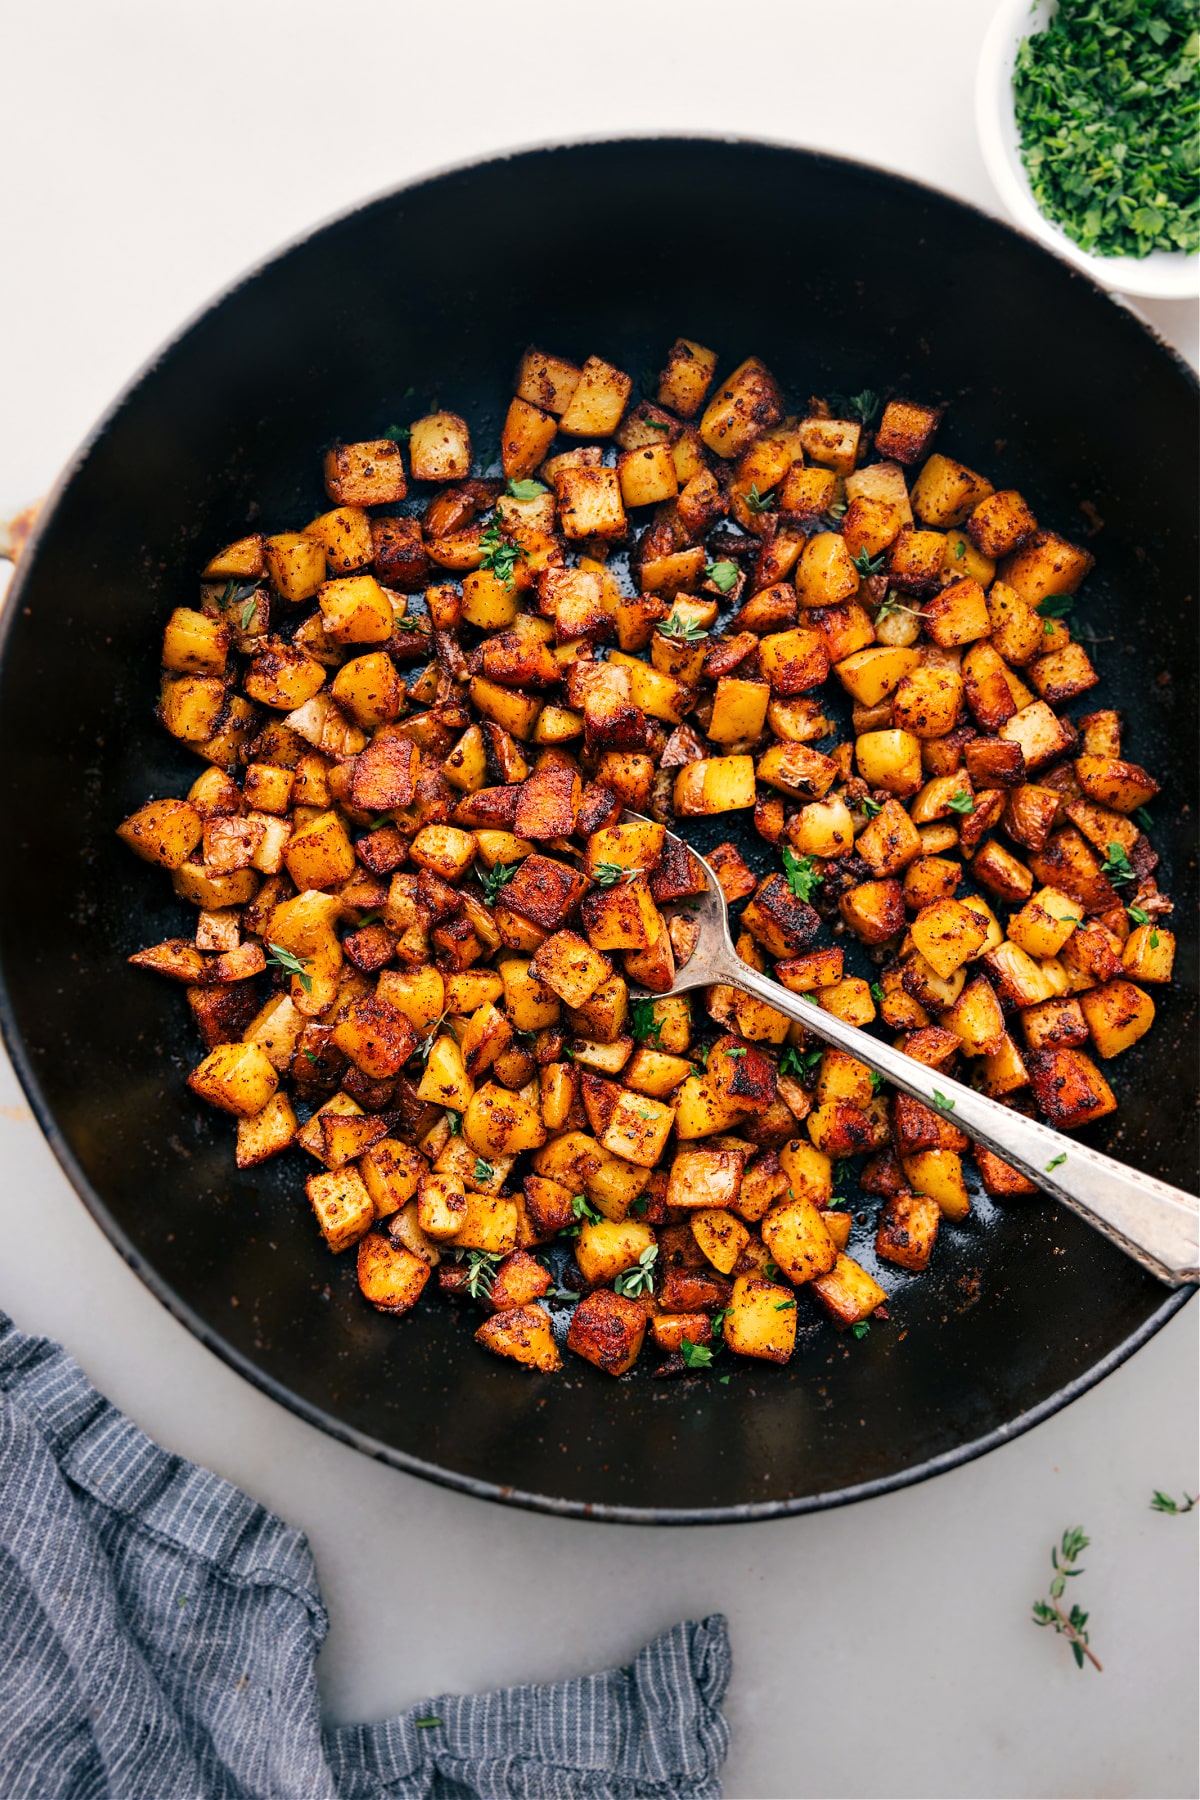 Freshly cooked Skillet Breakfast Potatoes ready to be enjoyed.